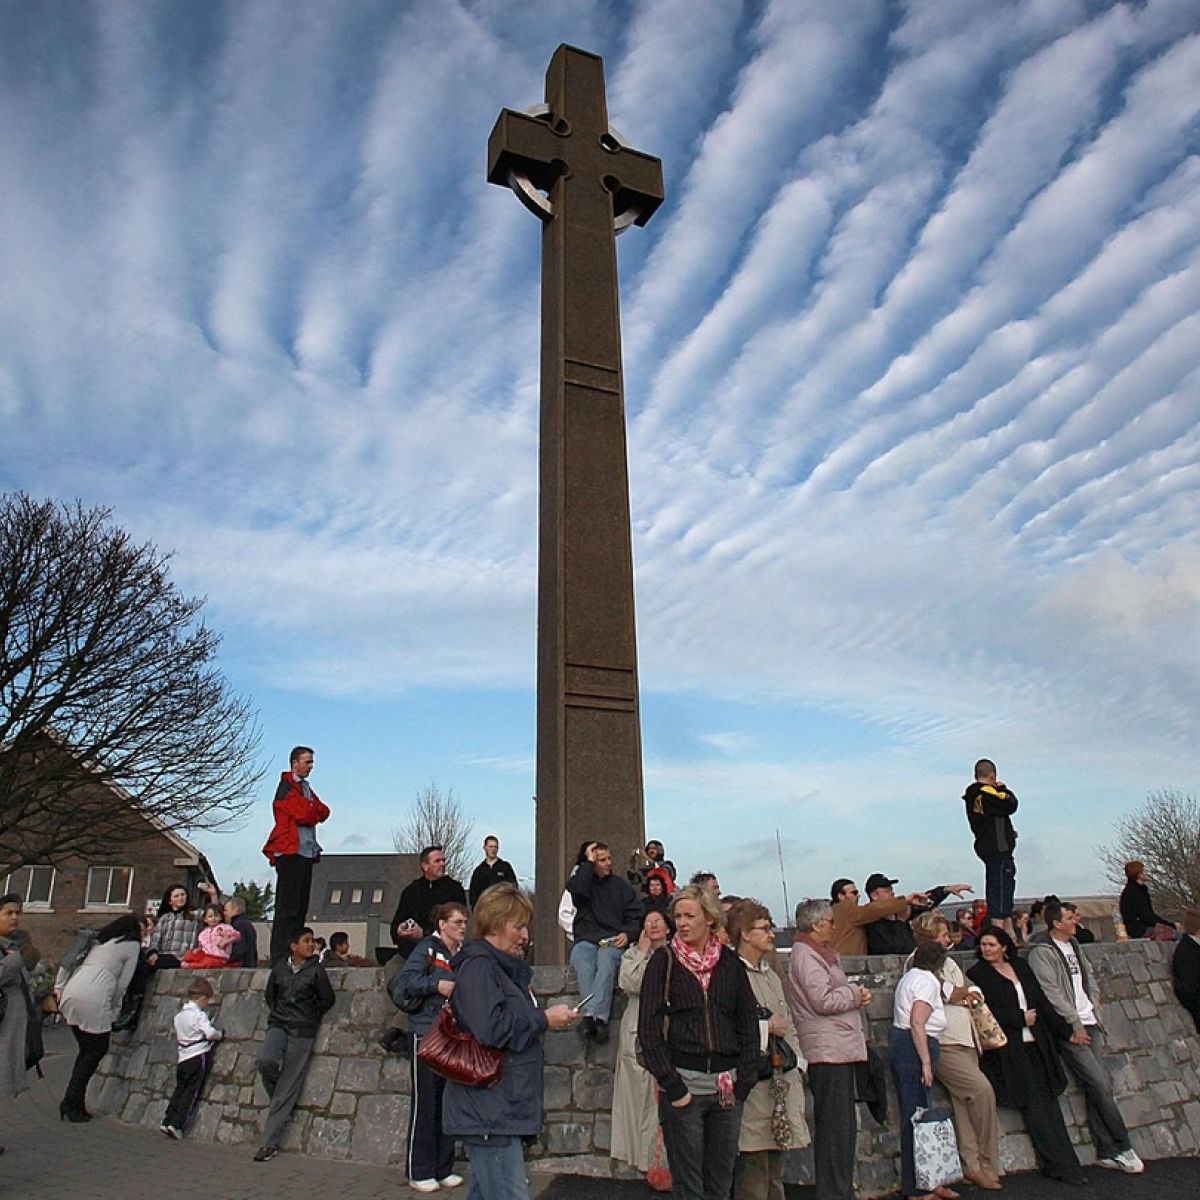 Over 1.5m view religious service from Knock online - The Irish 